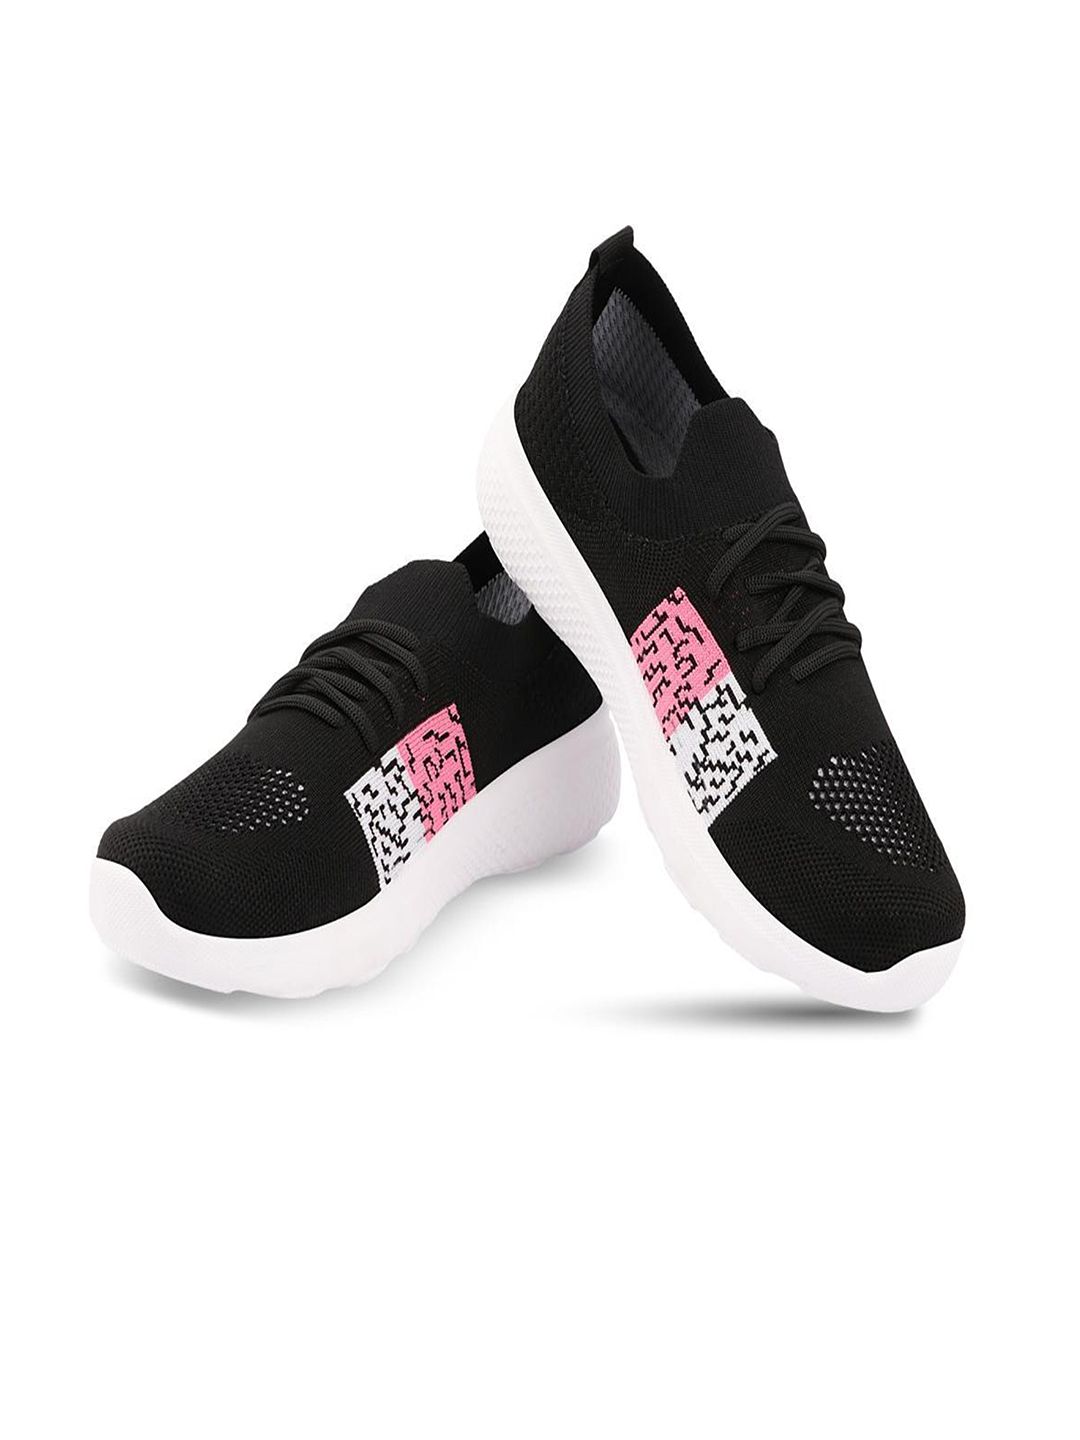 BEONZA Women Black Mesh Running Non-Marking Shoes Price in India